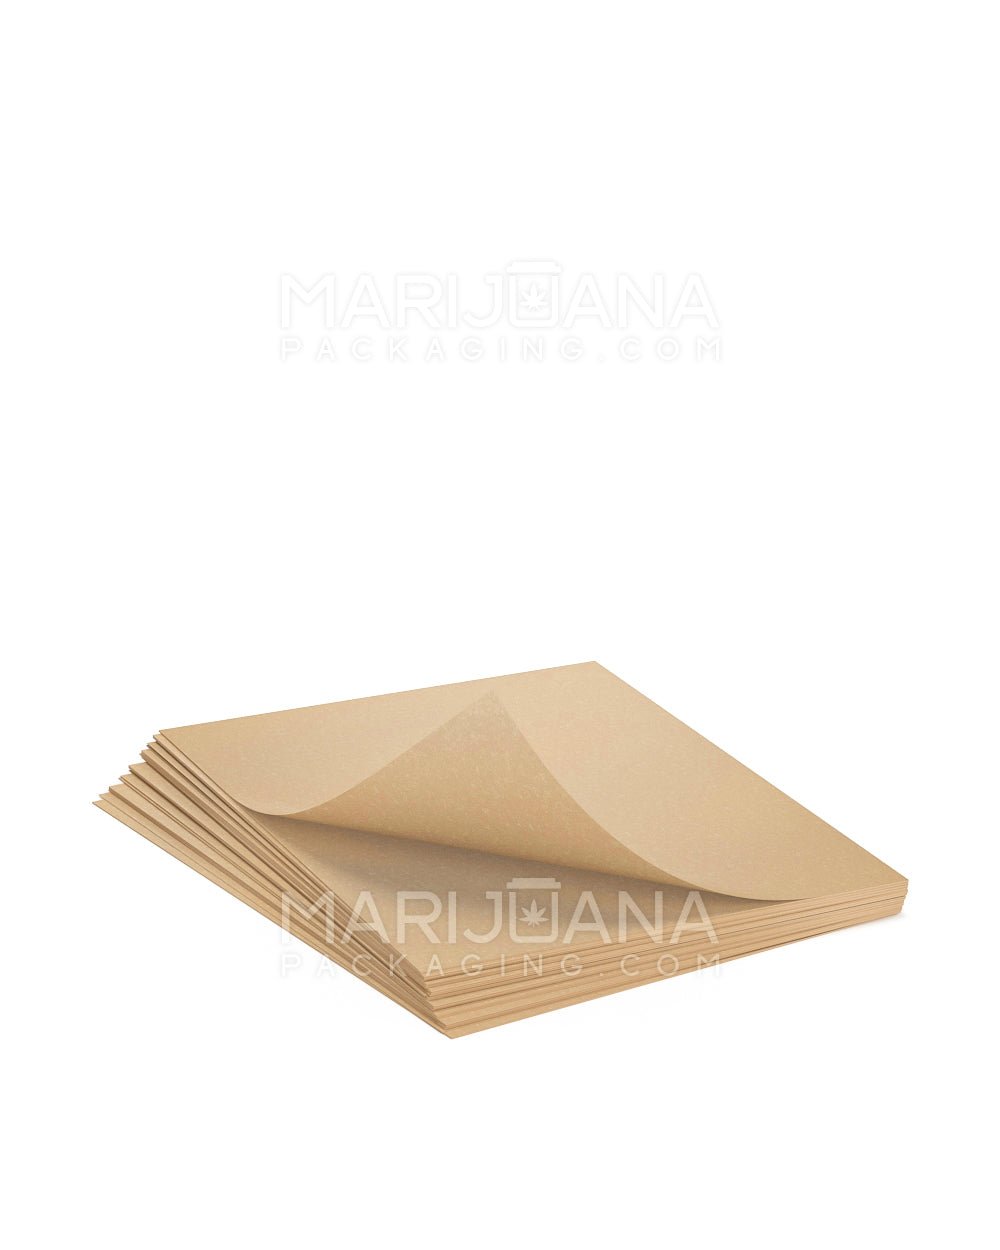 Silicone Coated Parchment Paper | 12in x 16in - Natural Brown - 100 Count - 4